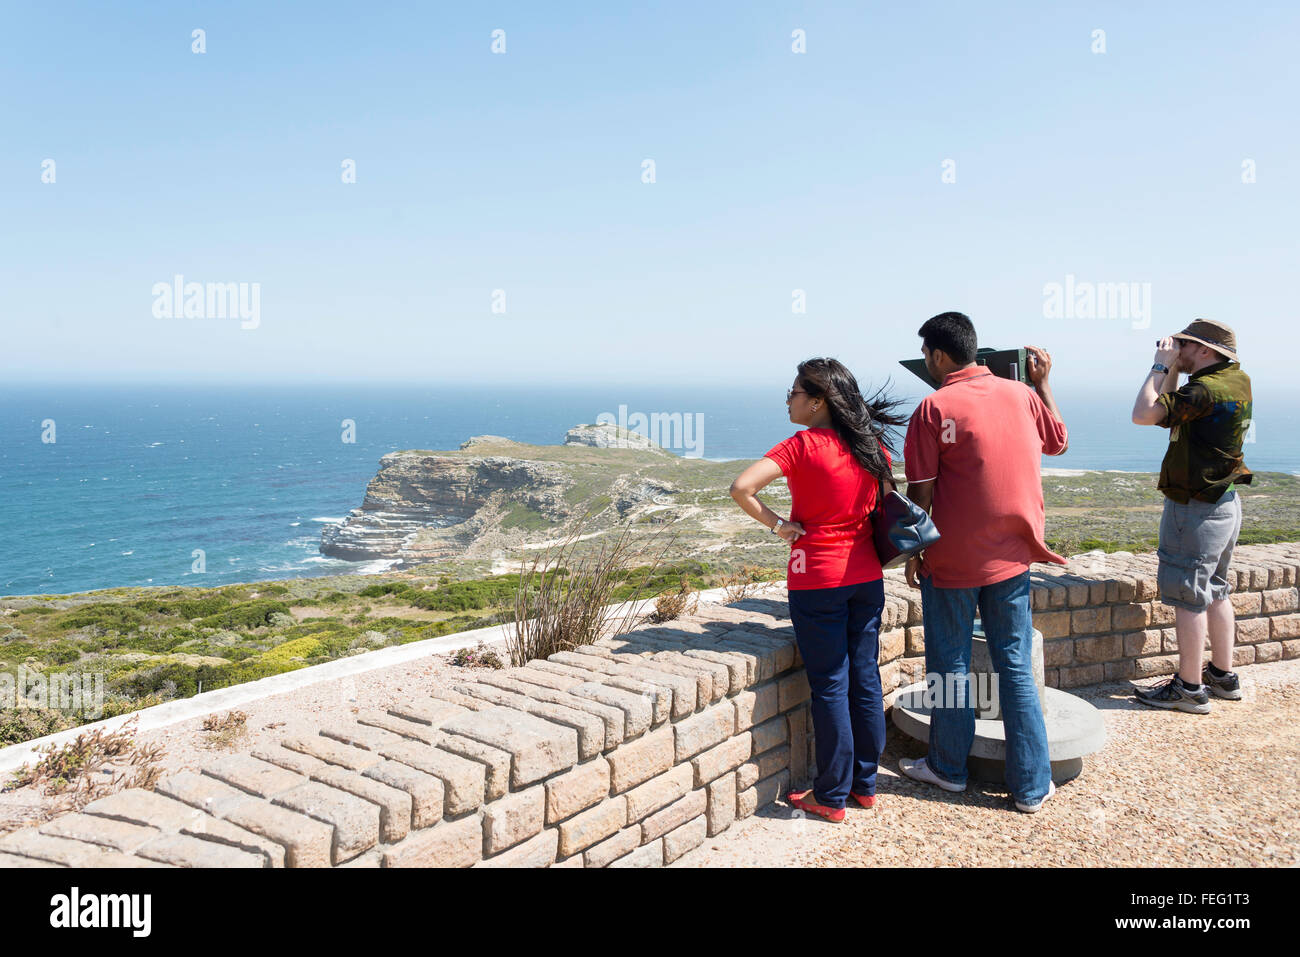 Lookout at Cape of Good Hope, Cape Peninsula, City of Cape Town Metropolitan Municipality, Western Cape Province, South Africa Stock Photo